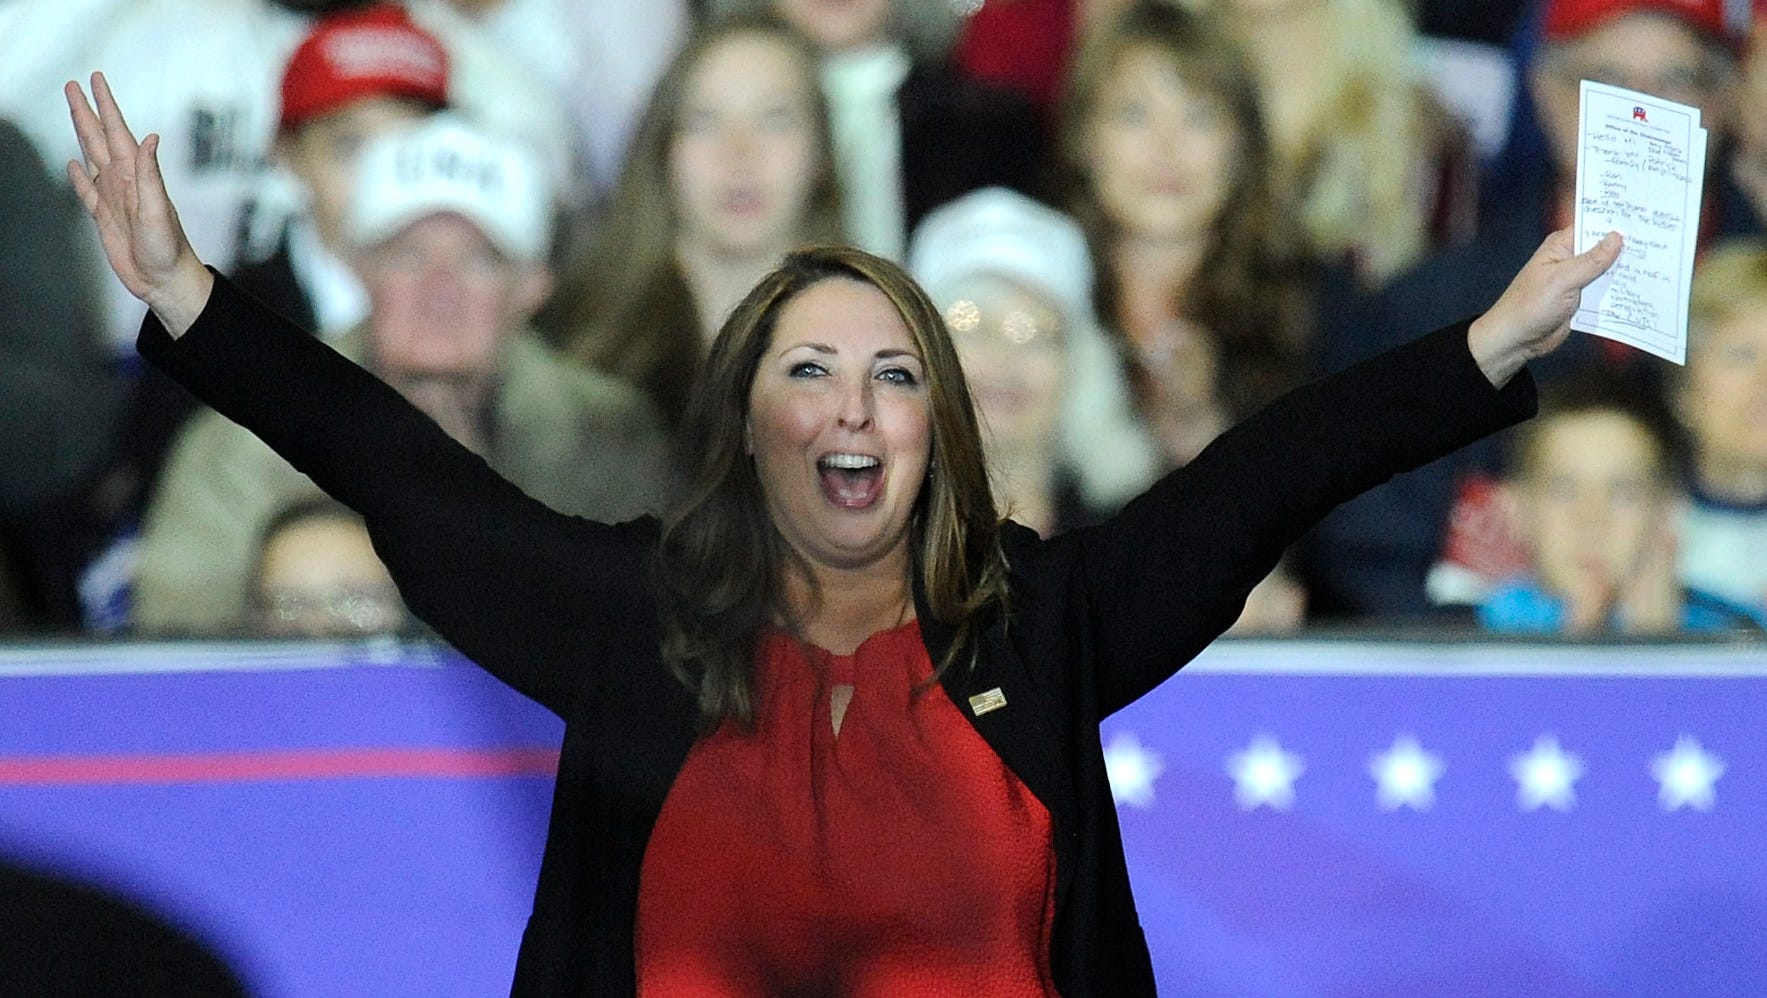 Republican National Committee Chairwoman Ronna McDaniel waves at the crowd before speaking.